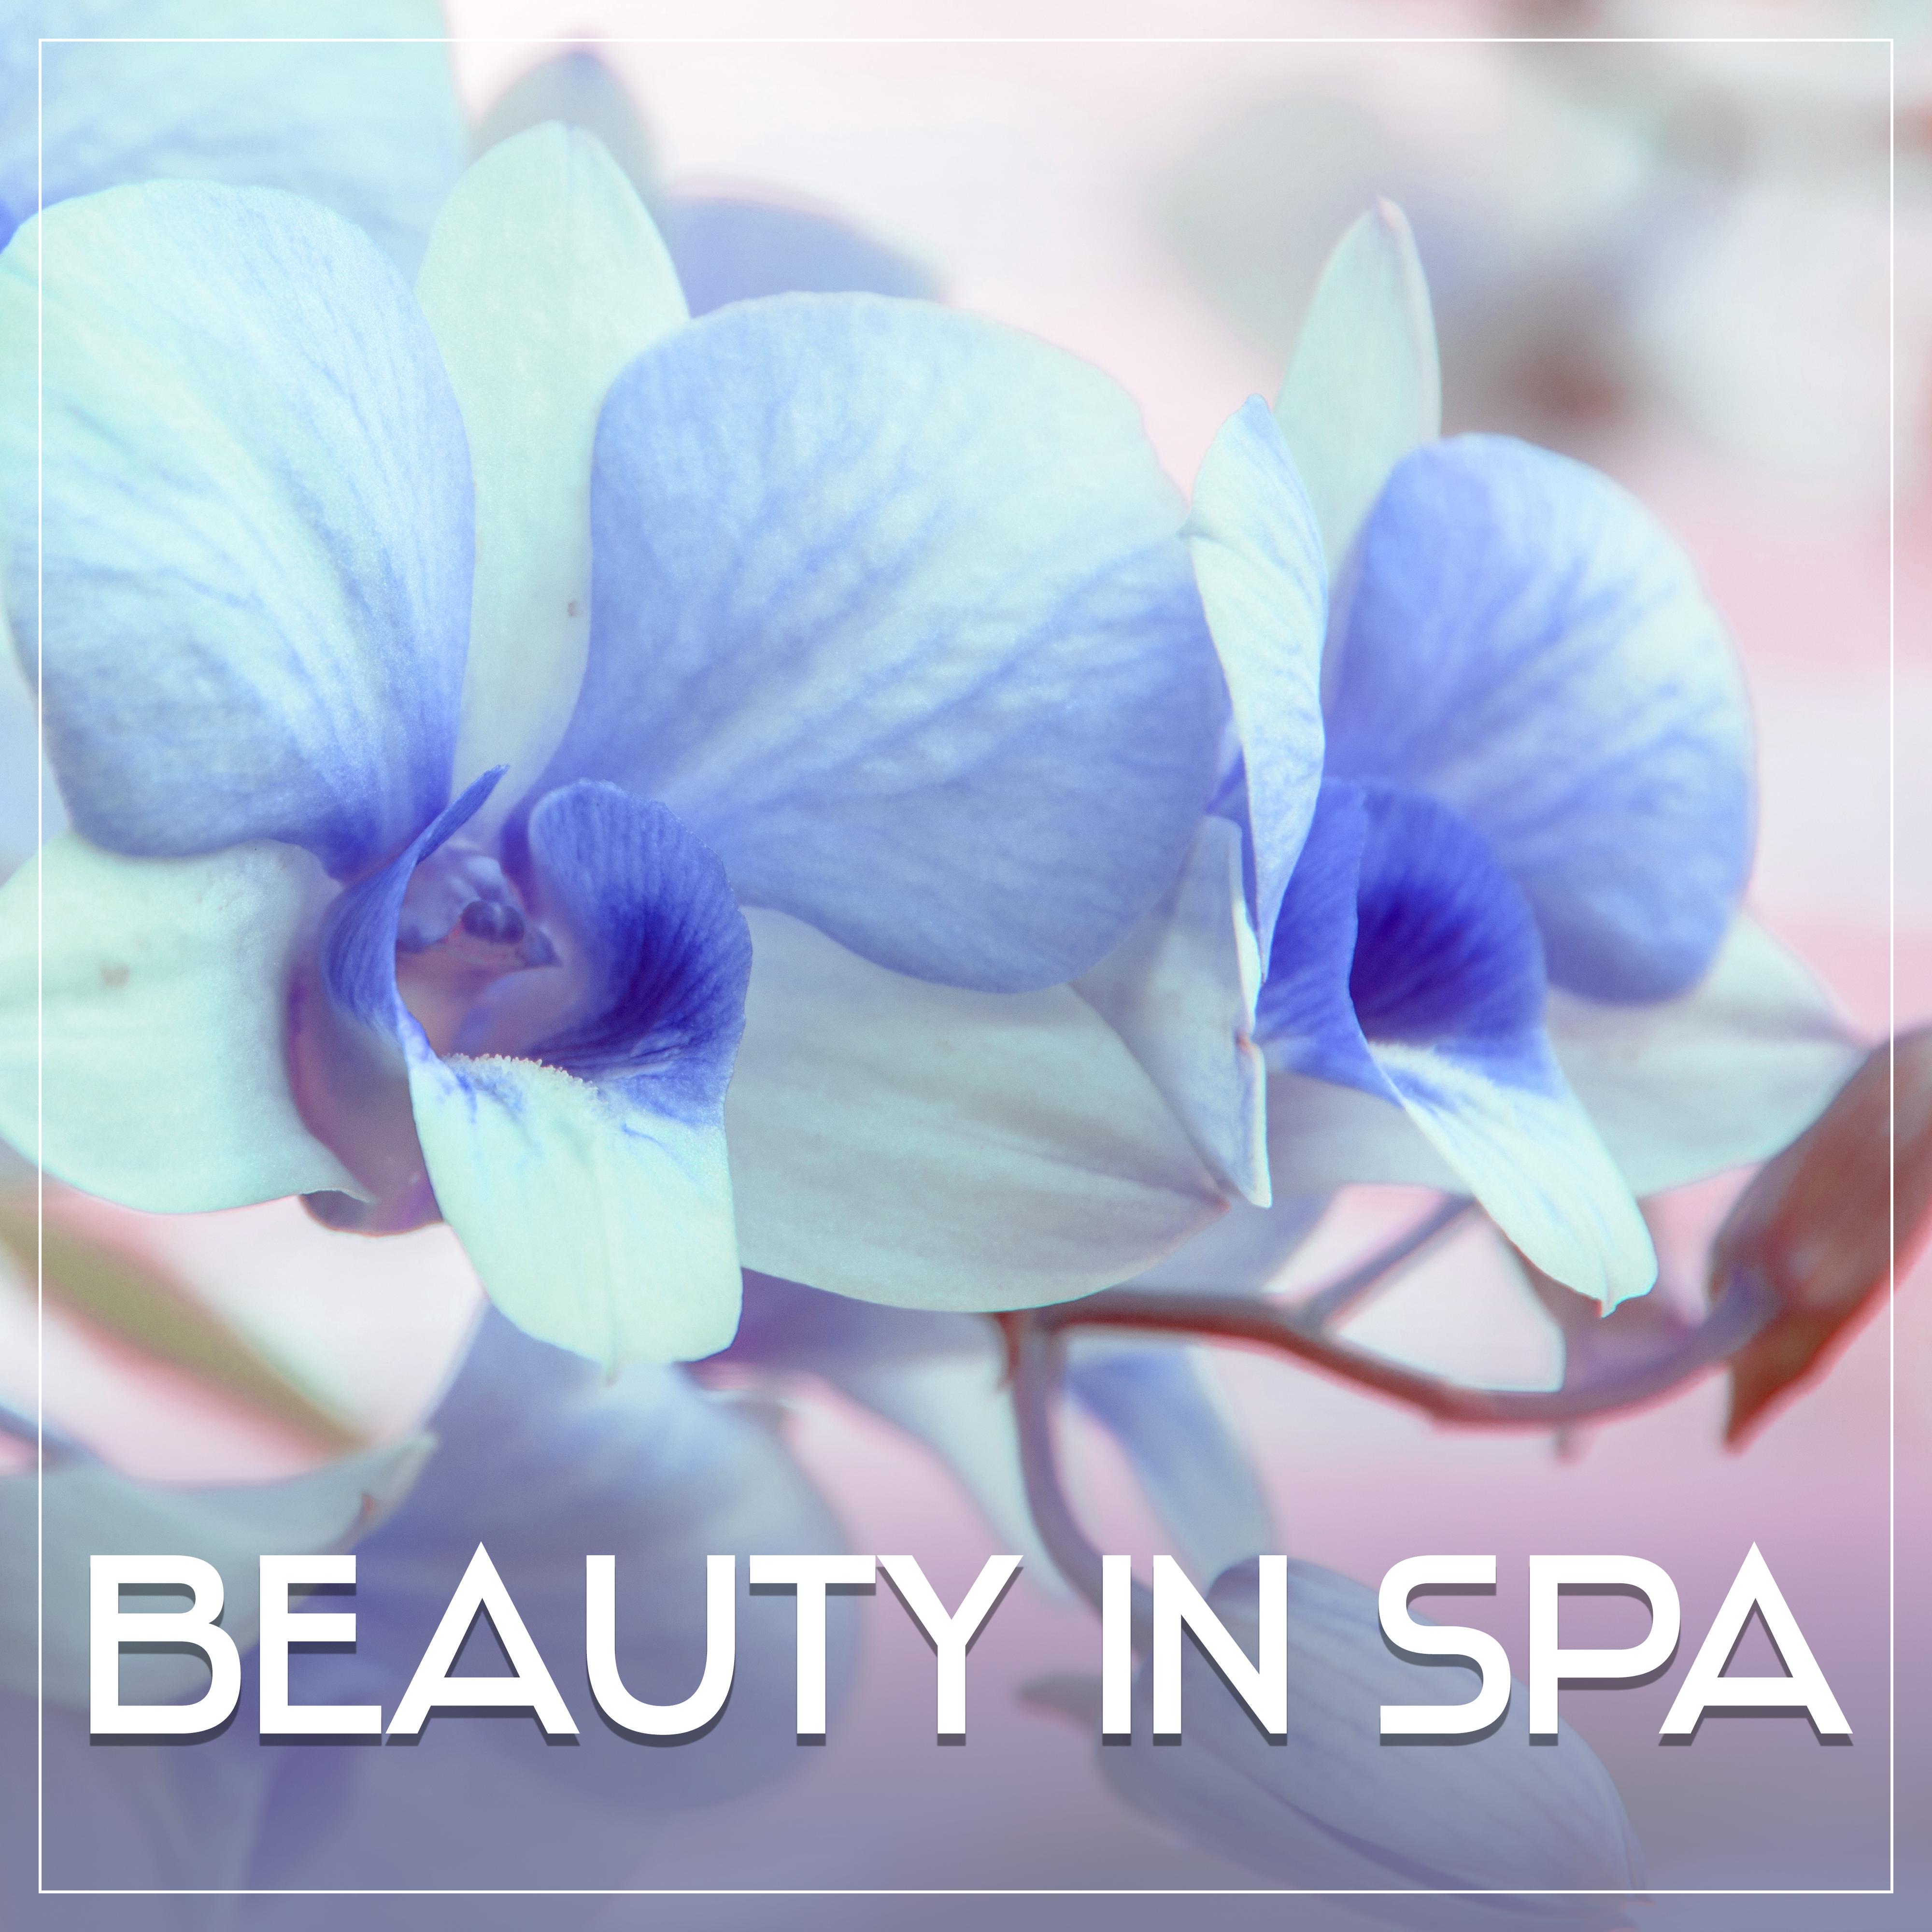 Beauty in Spa  Relaxation Wellness, Stress Relief, Deep Sleep, Soft Music, Nature Sounds for Rest, Spa Music, Peaceful Mind